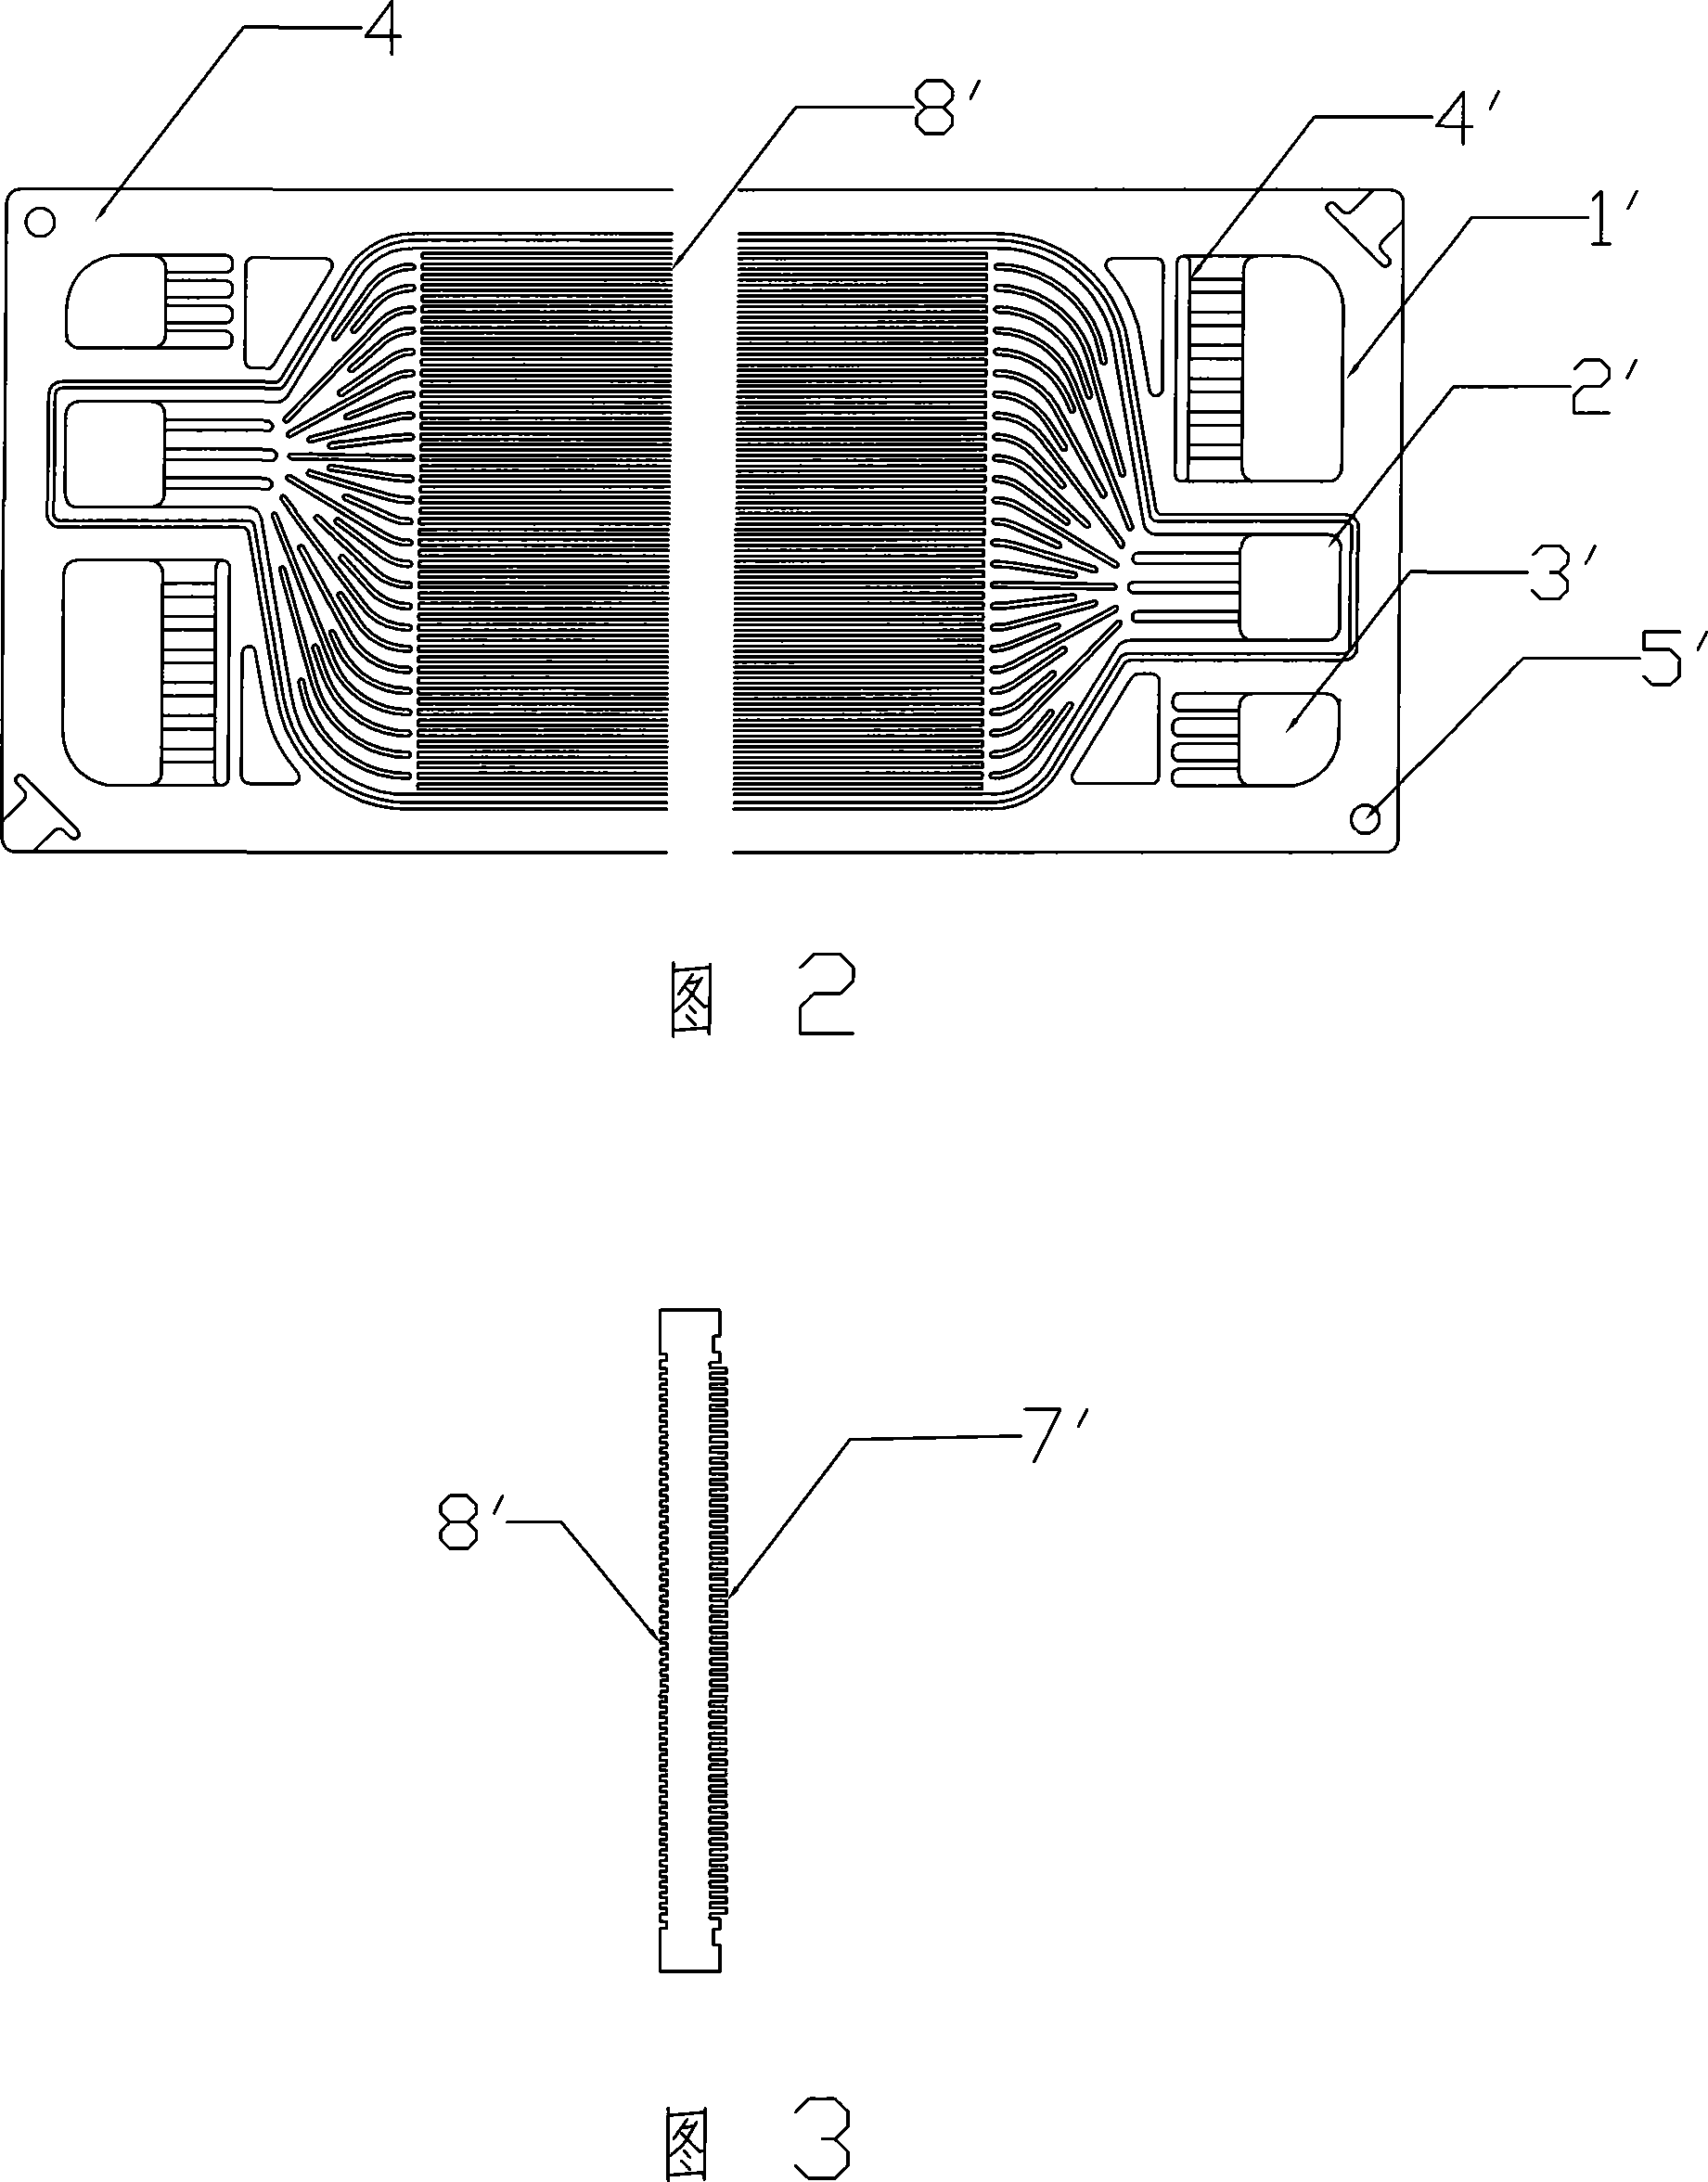 Production method for flexible graphite polar plate with plough groove on both faces